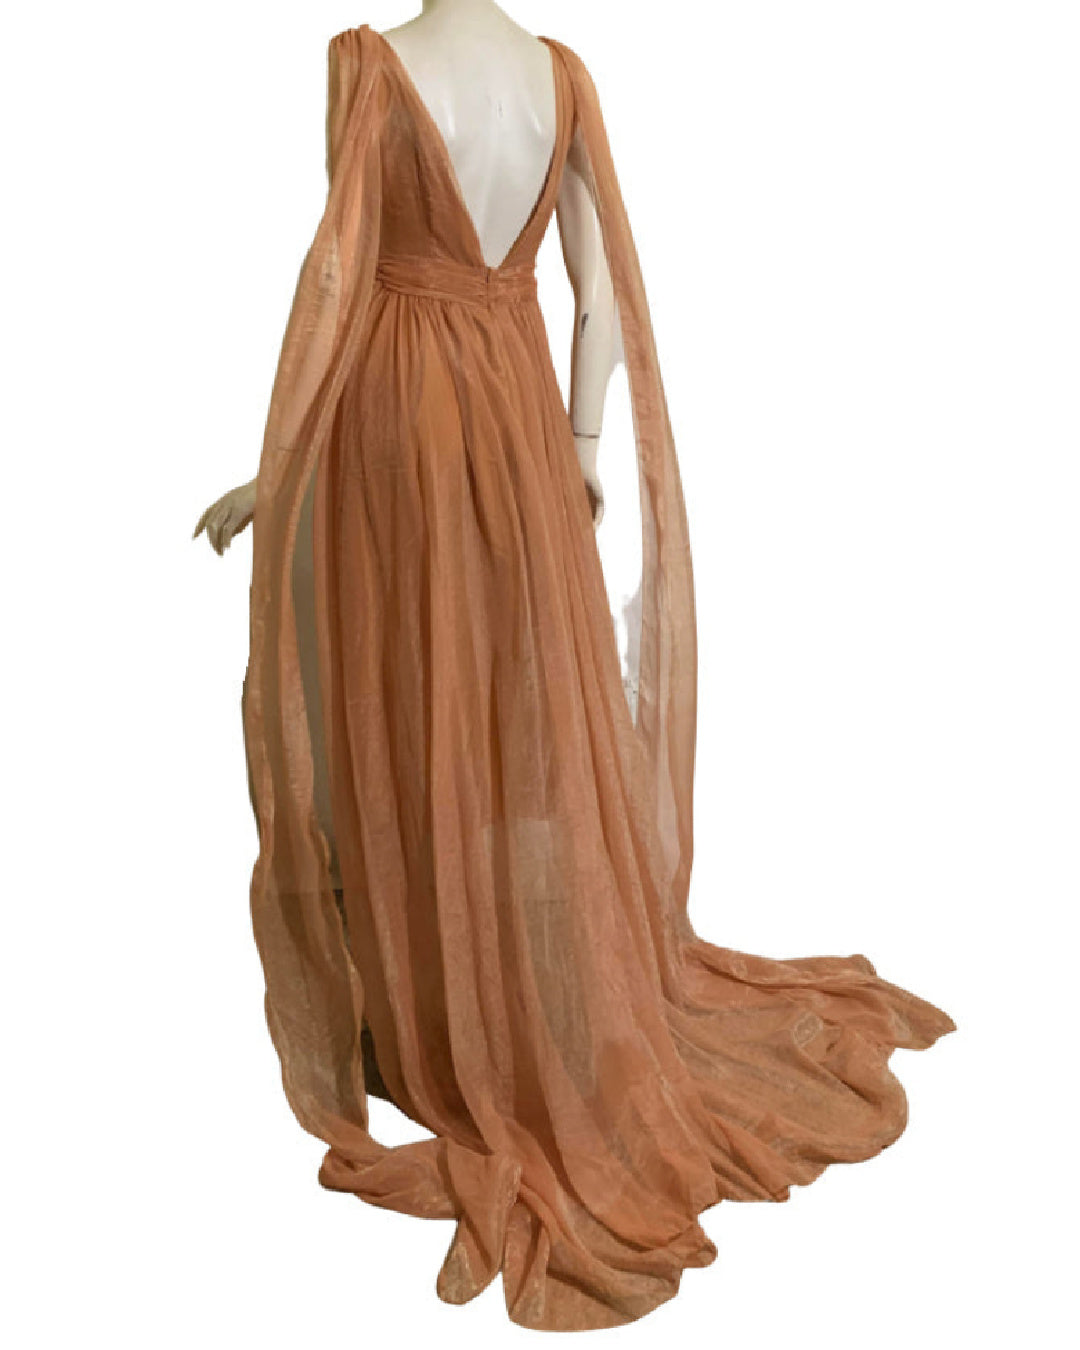 Parisa- the Gossamer Scarf Draped Sheer Sleeveless Gown 2 Colors